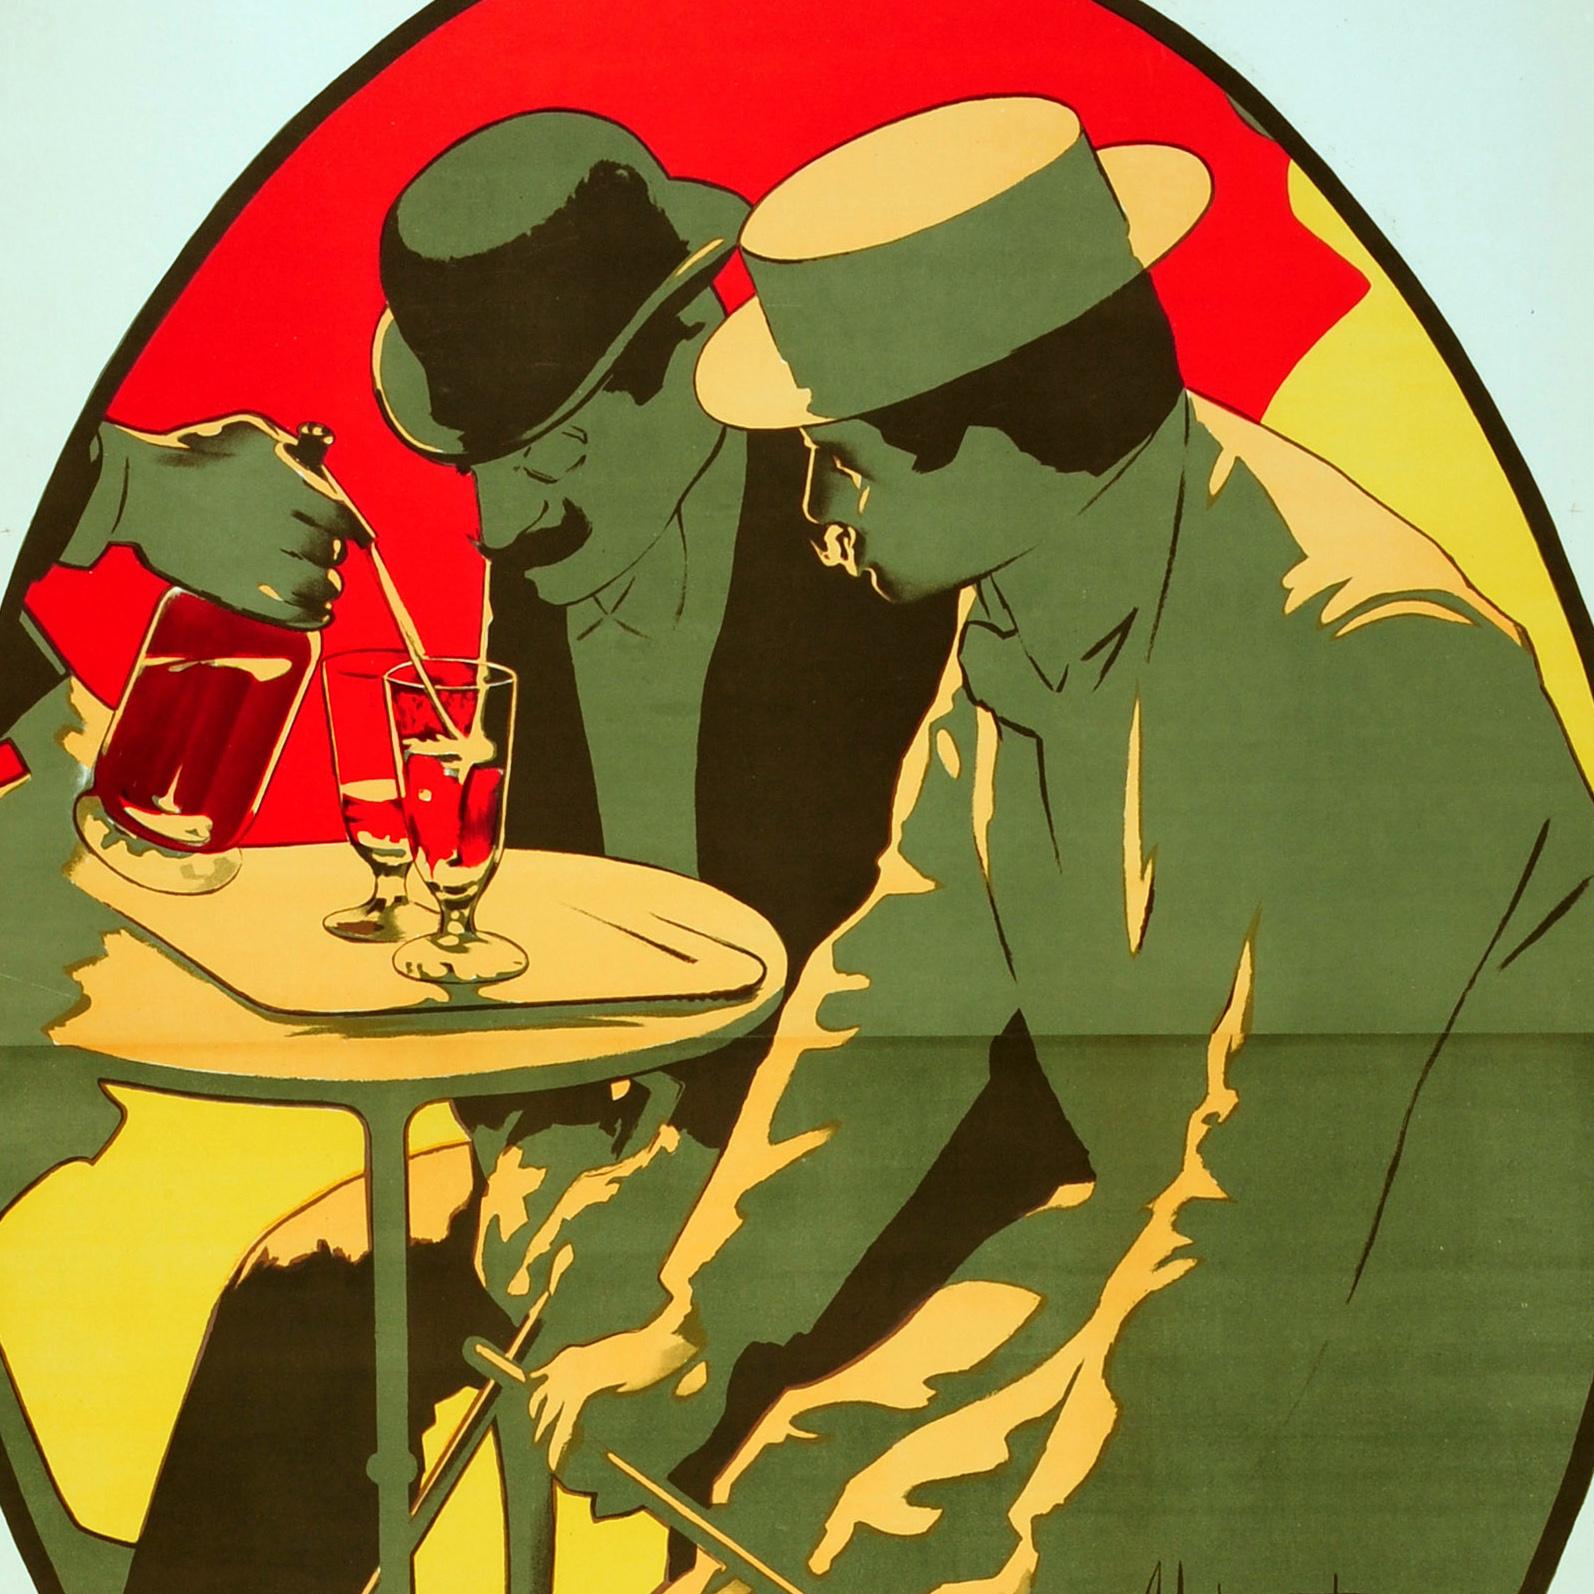 Original antique three panel drink advertising poster for the Italian bitter aperitif alcohol brand Campari featuring a striking oval framed Art Nouveau style design by the notable German painter, illustrator, set and costume designer considered the